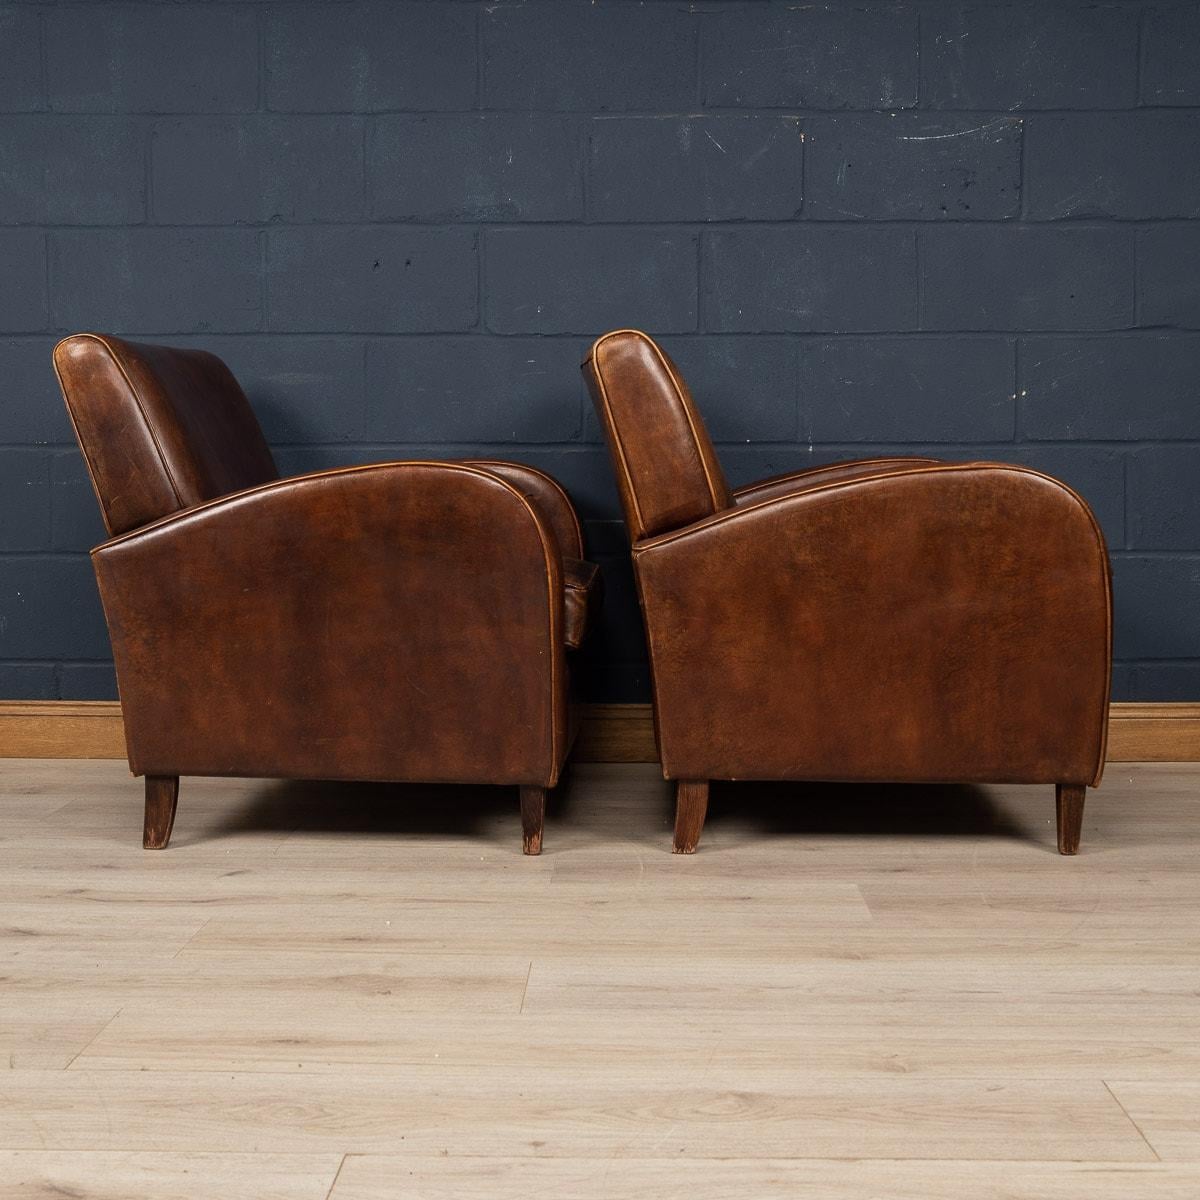 20th Century Sheepskin Leather Club Chairs, Holland For Sale 2